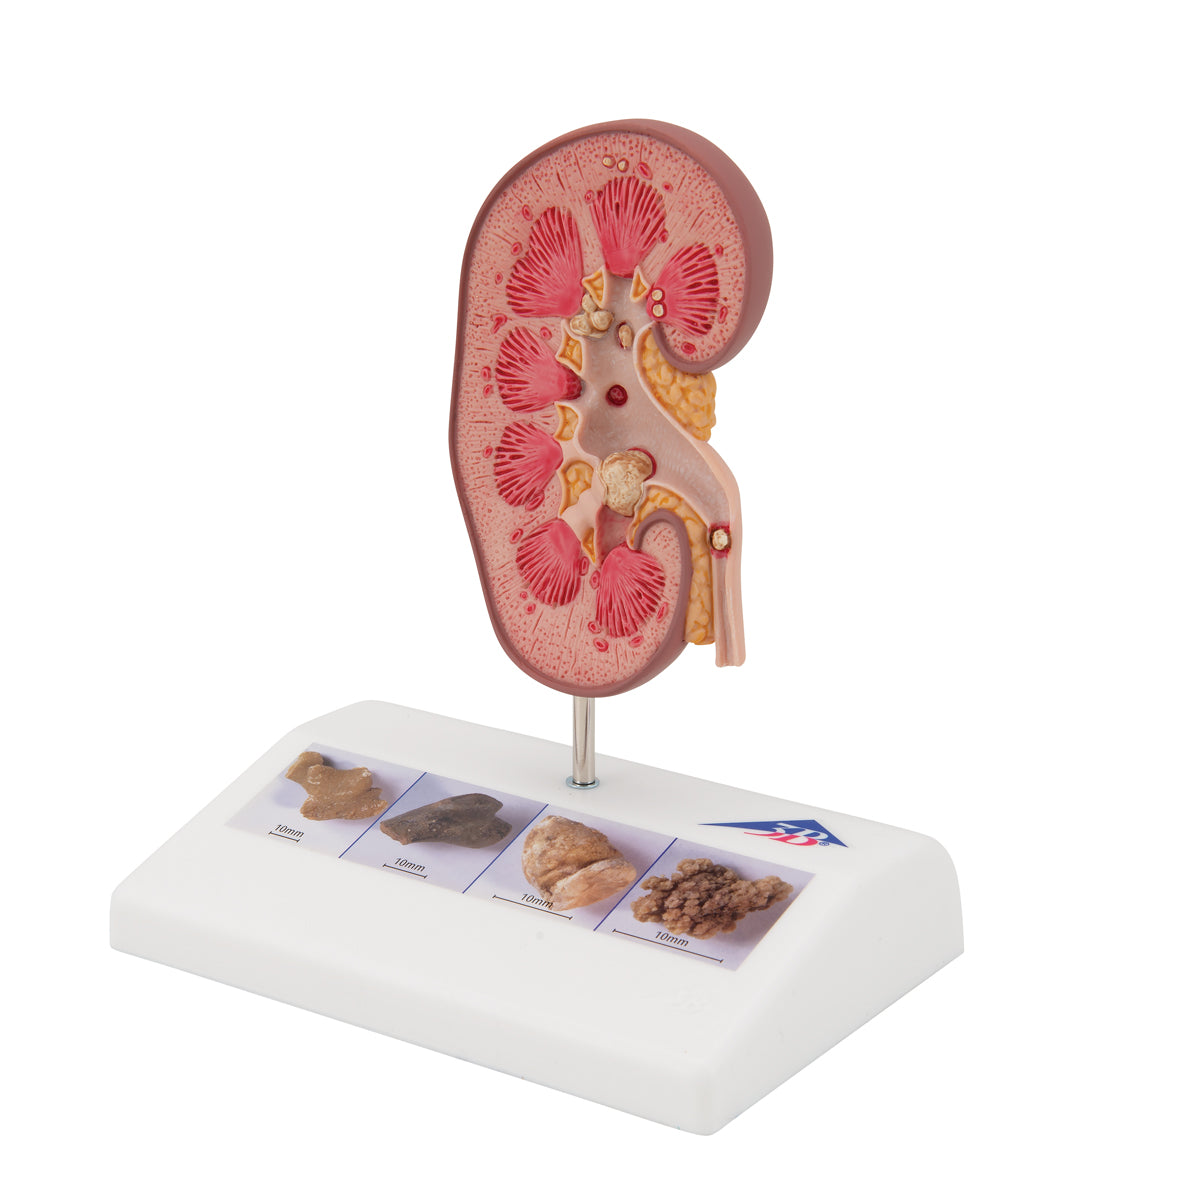 Kidney model showing stones in different places in the kidney